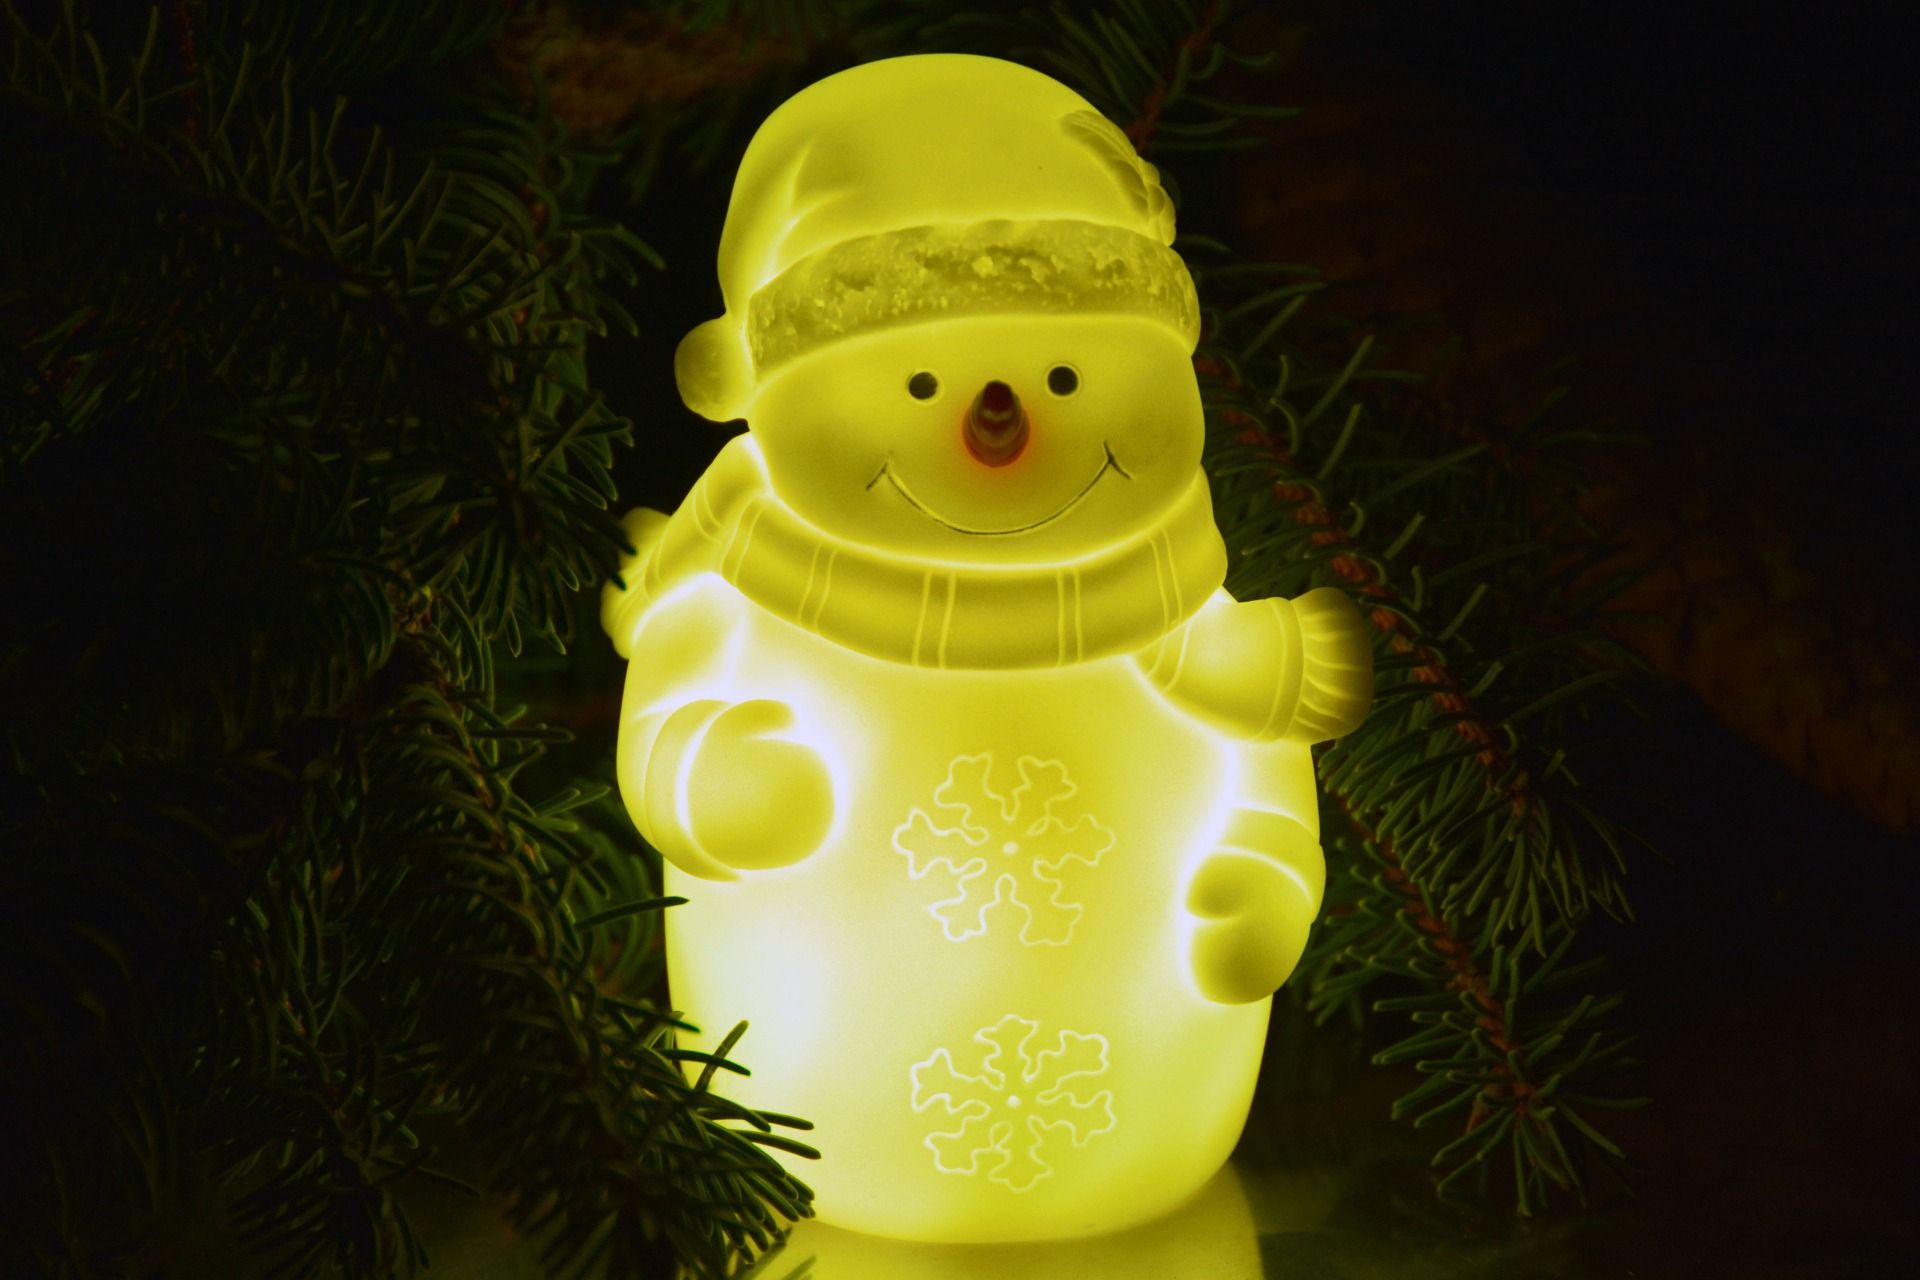 Adorable smiling snowman glowing in a semi golden light with a Christmas tree on its background